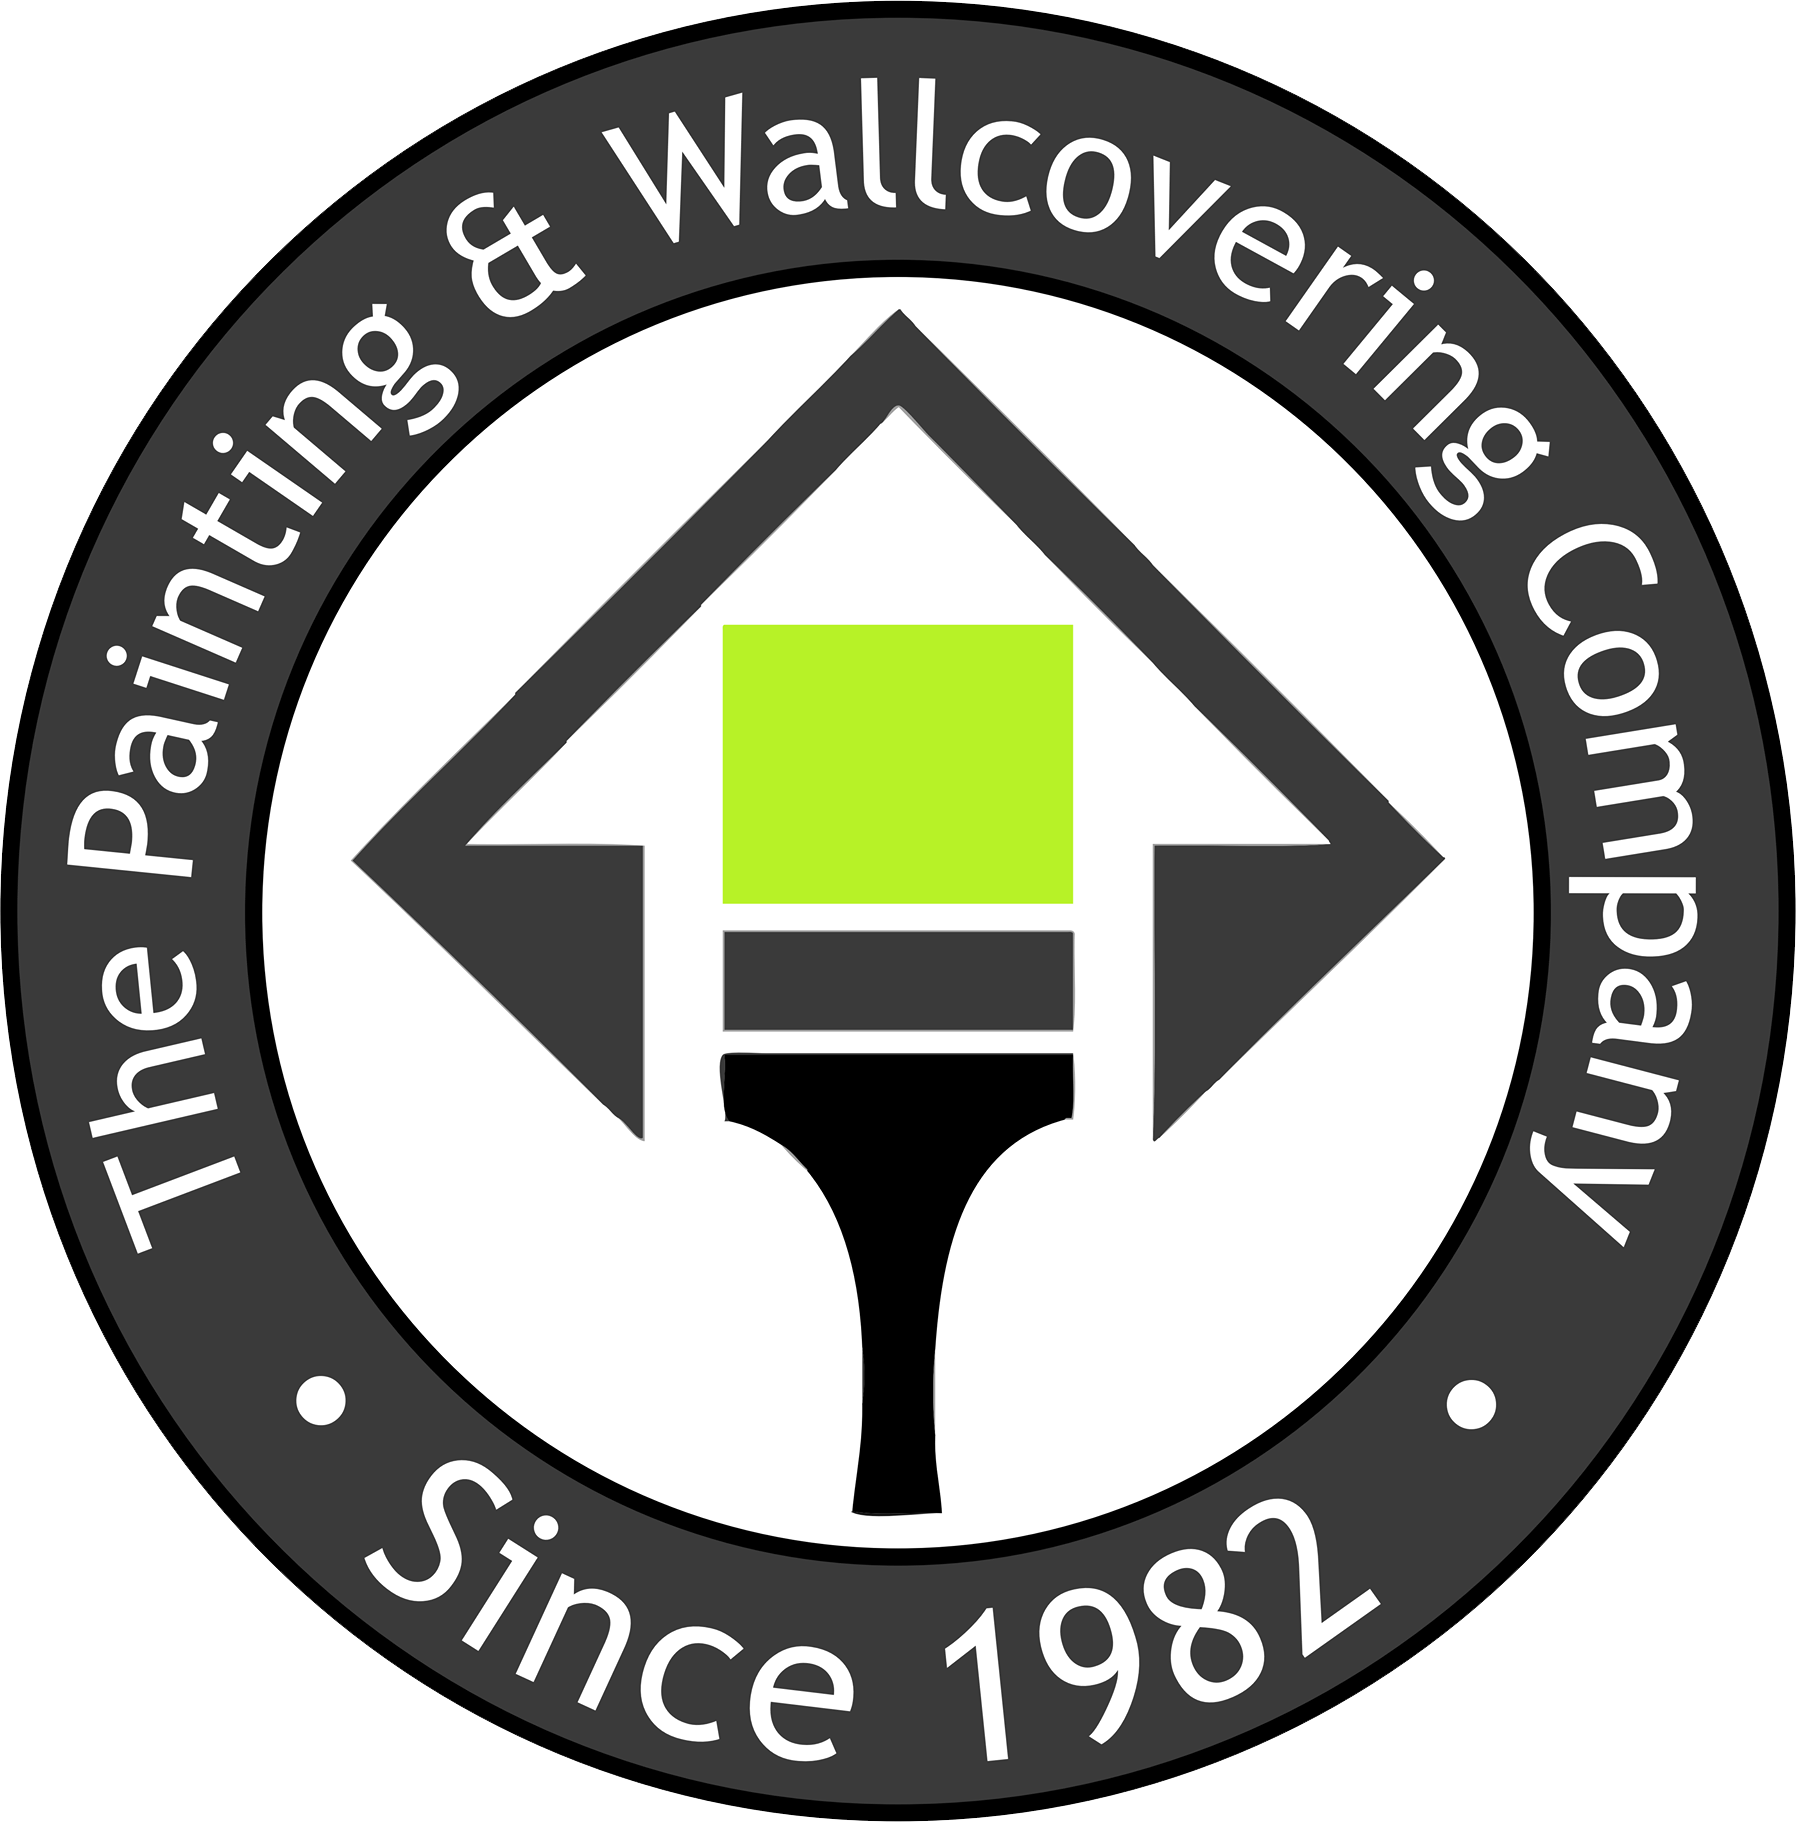 Member of the painting wallcovering employer association